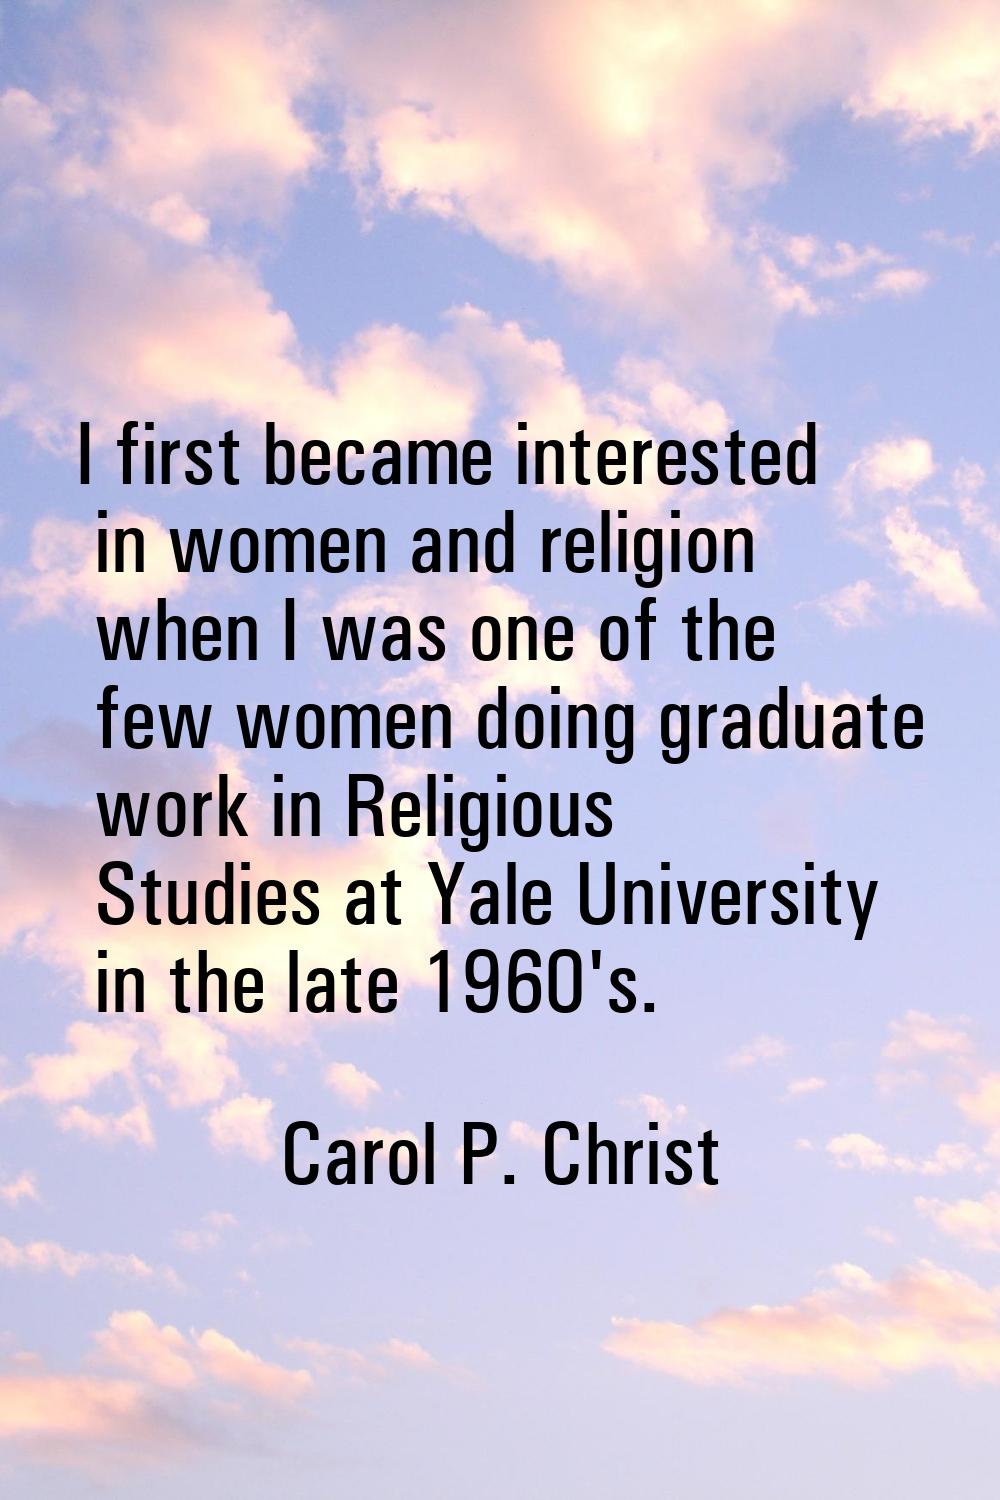 I first became interested in women and religion when I was one of the few women doing graduate work